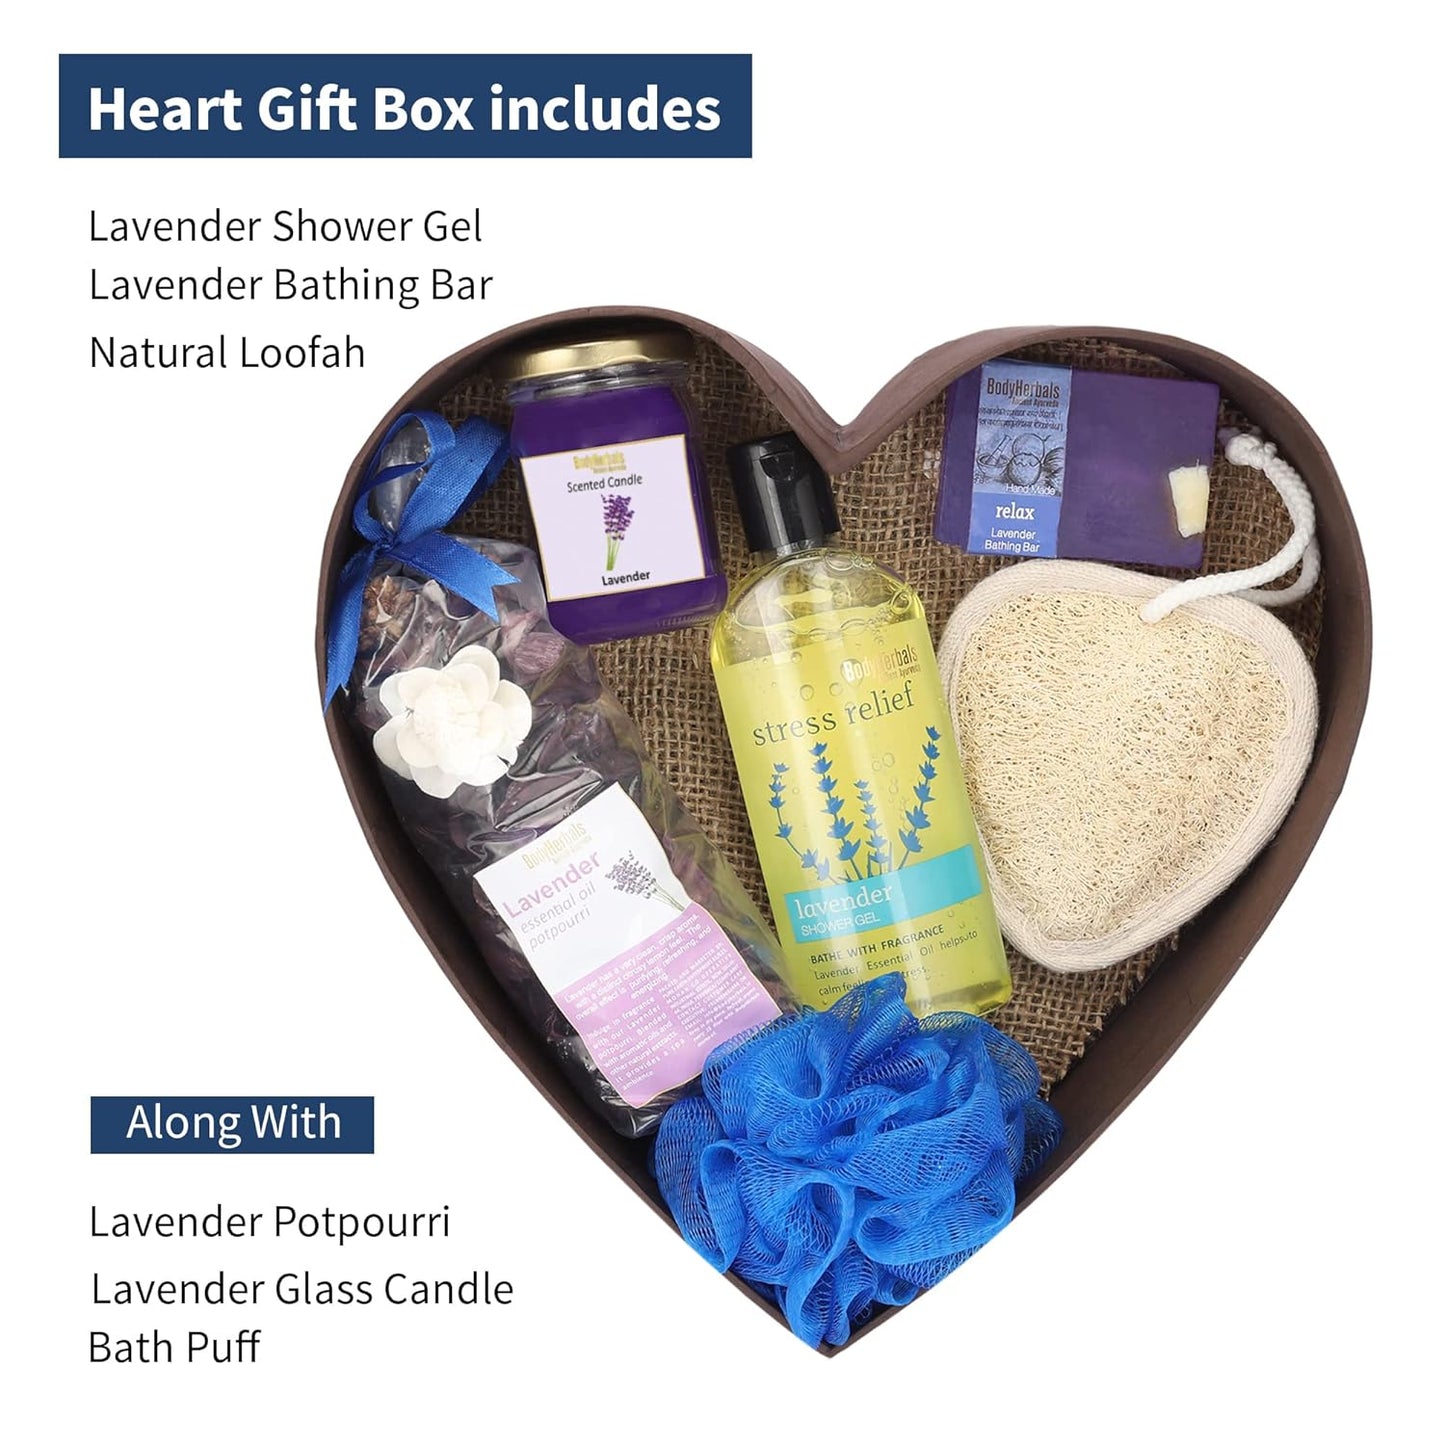 BodyHerbals Lavender Surprise Bath & Body Care Gift Set for Women and Men